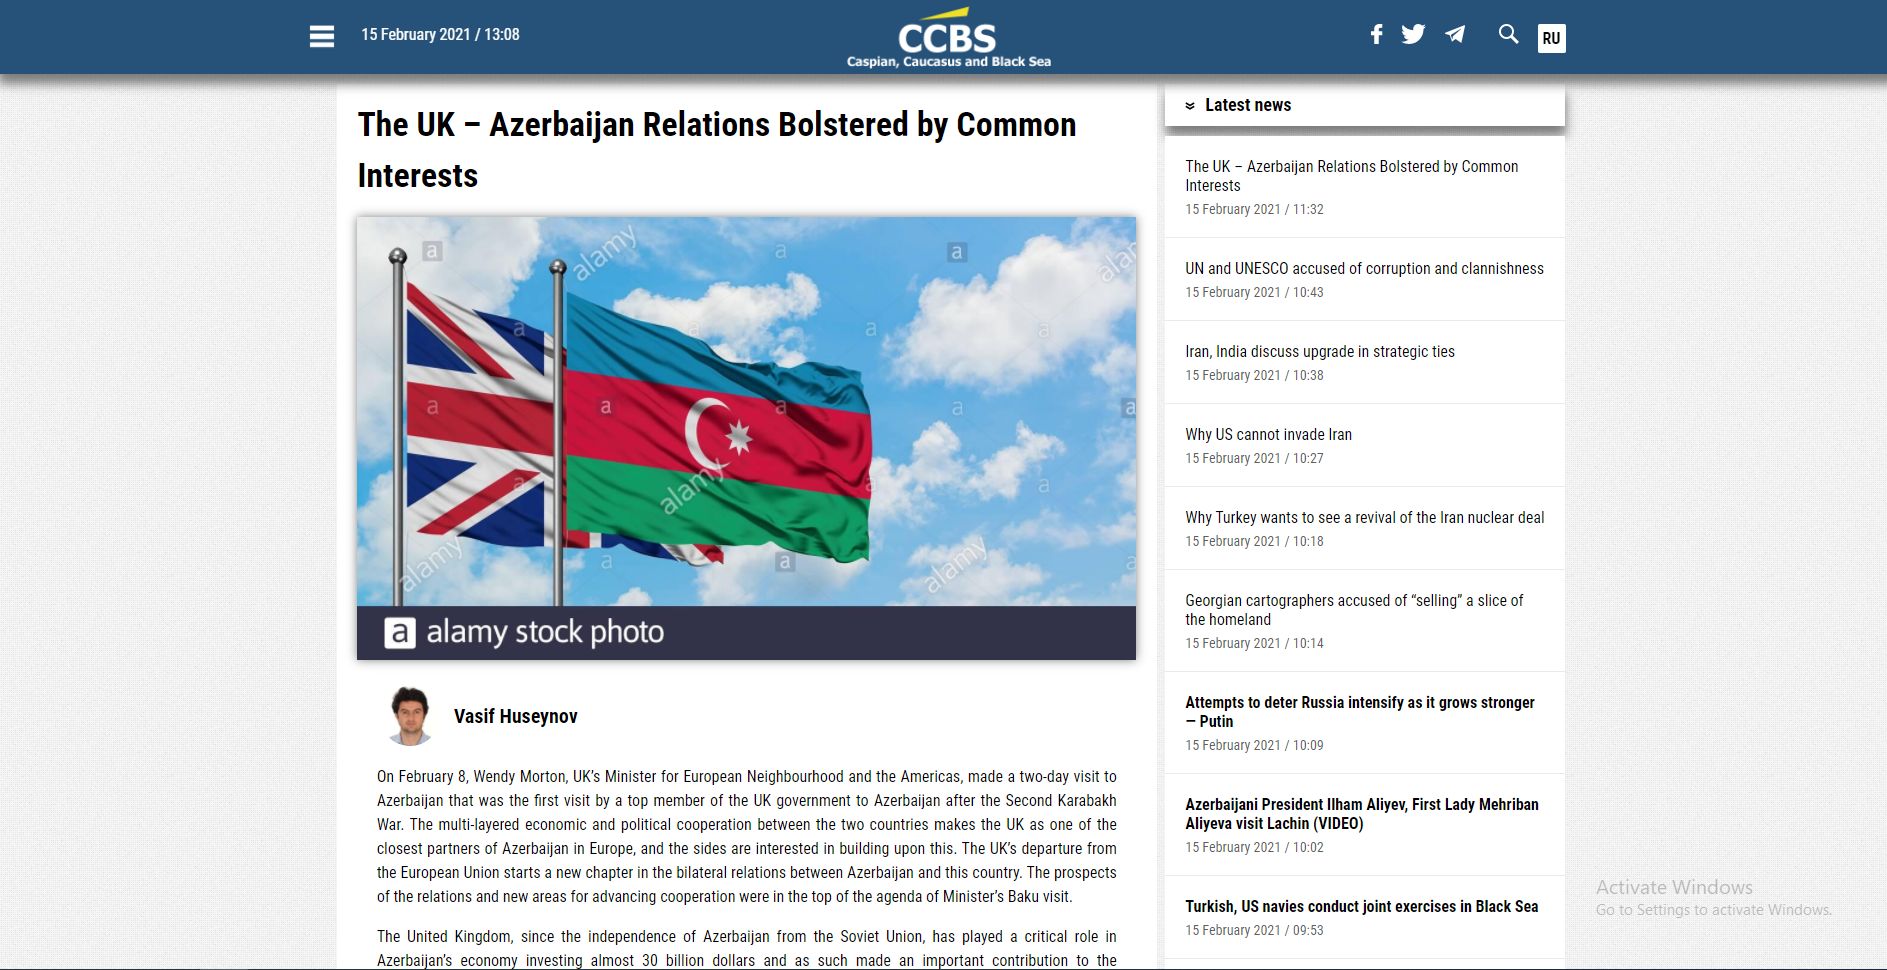 The UK – Azerbaijan Relations Bolstered by Common Interests